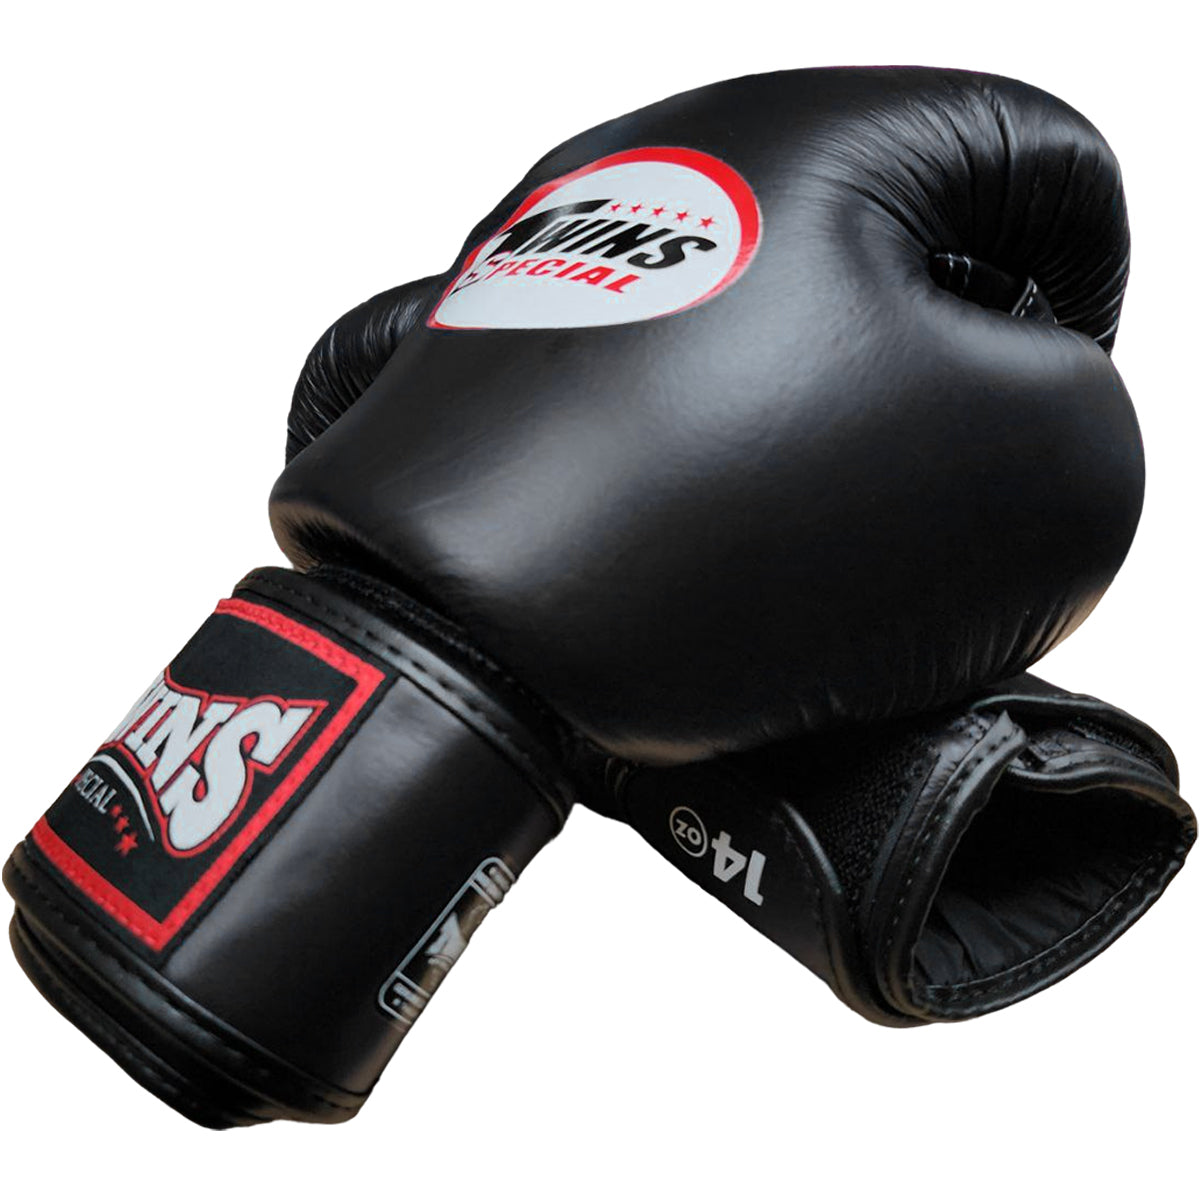 Boxing Gloves Twins Special BGVL3 Black